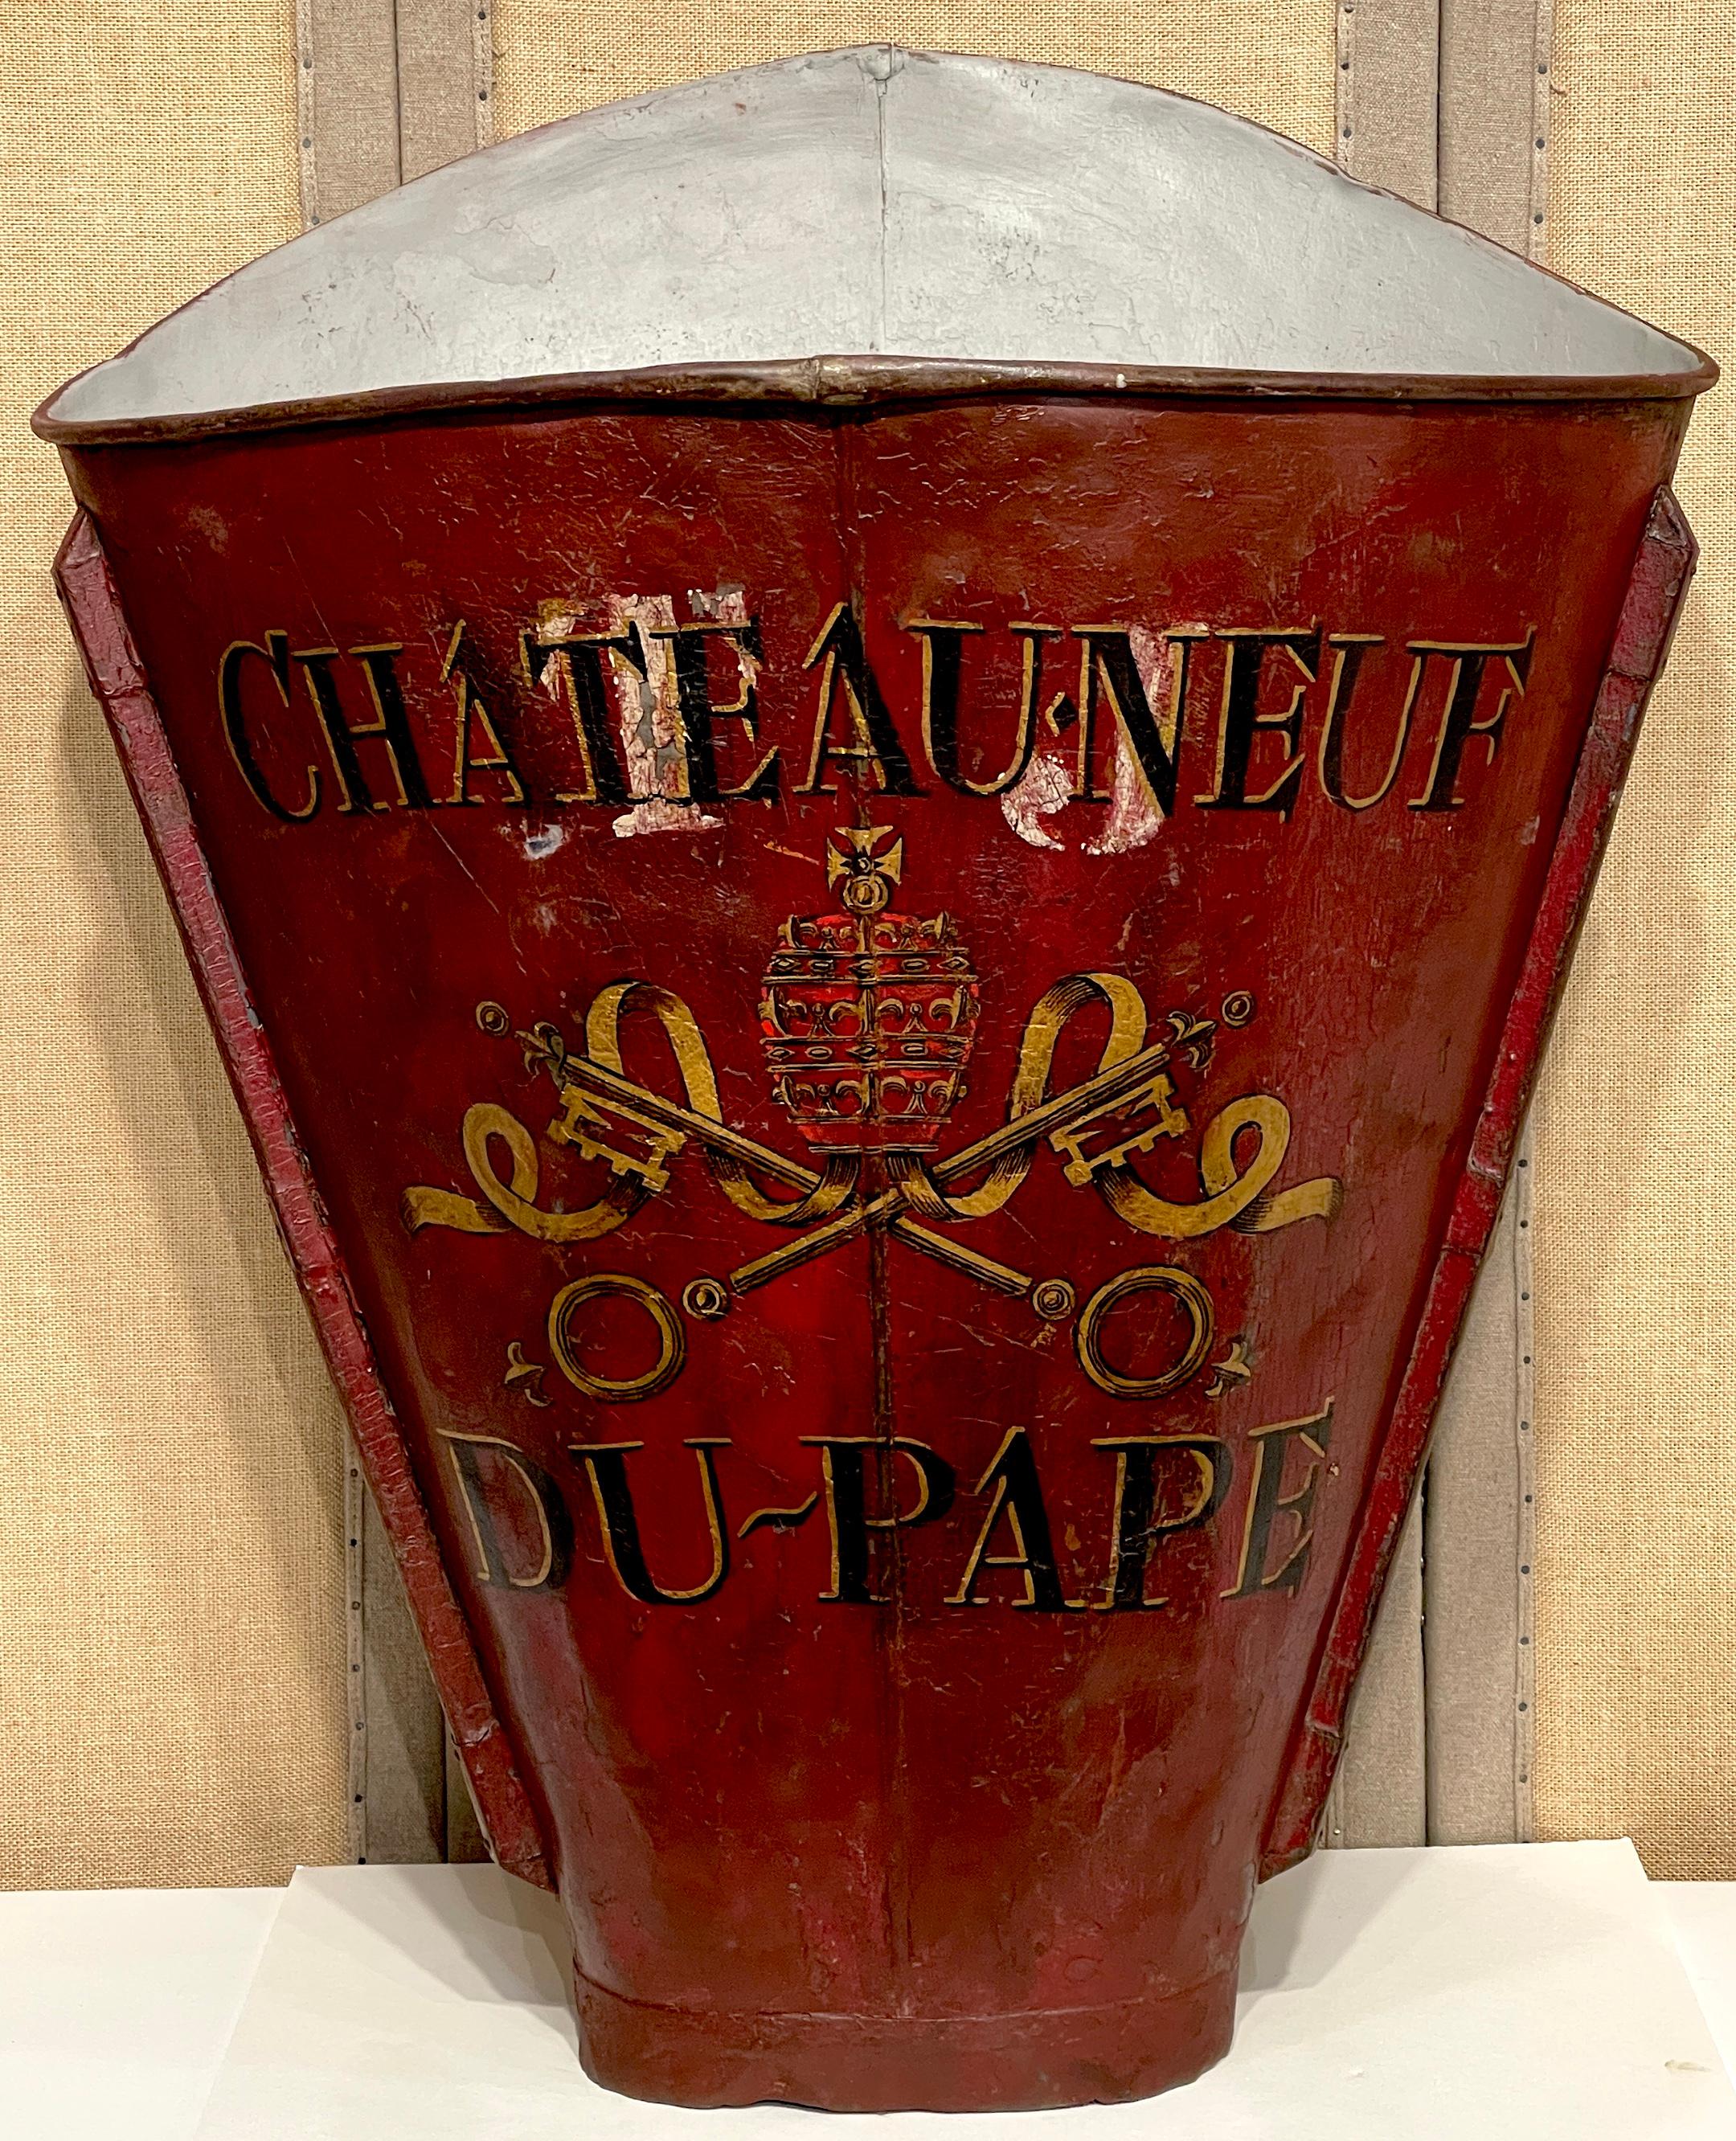 Antique Chateauneuf de Pape Red and Gilt Zinc Grape Hod
France, circa 1900s

A fine example from the world of French winemaking history is this exquisite antique Chateauneuf de Pape Red and Gilt Zinc Grape Hod, a rare find dating back to the 1900s.